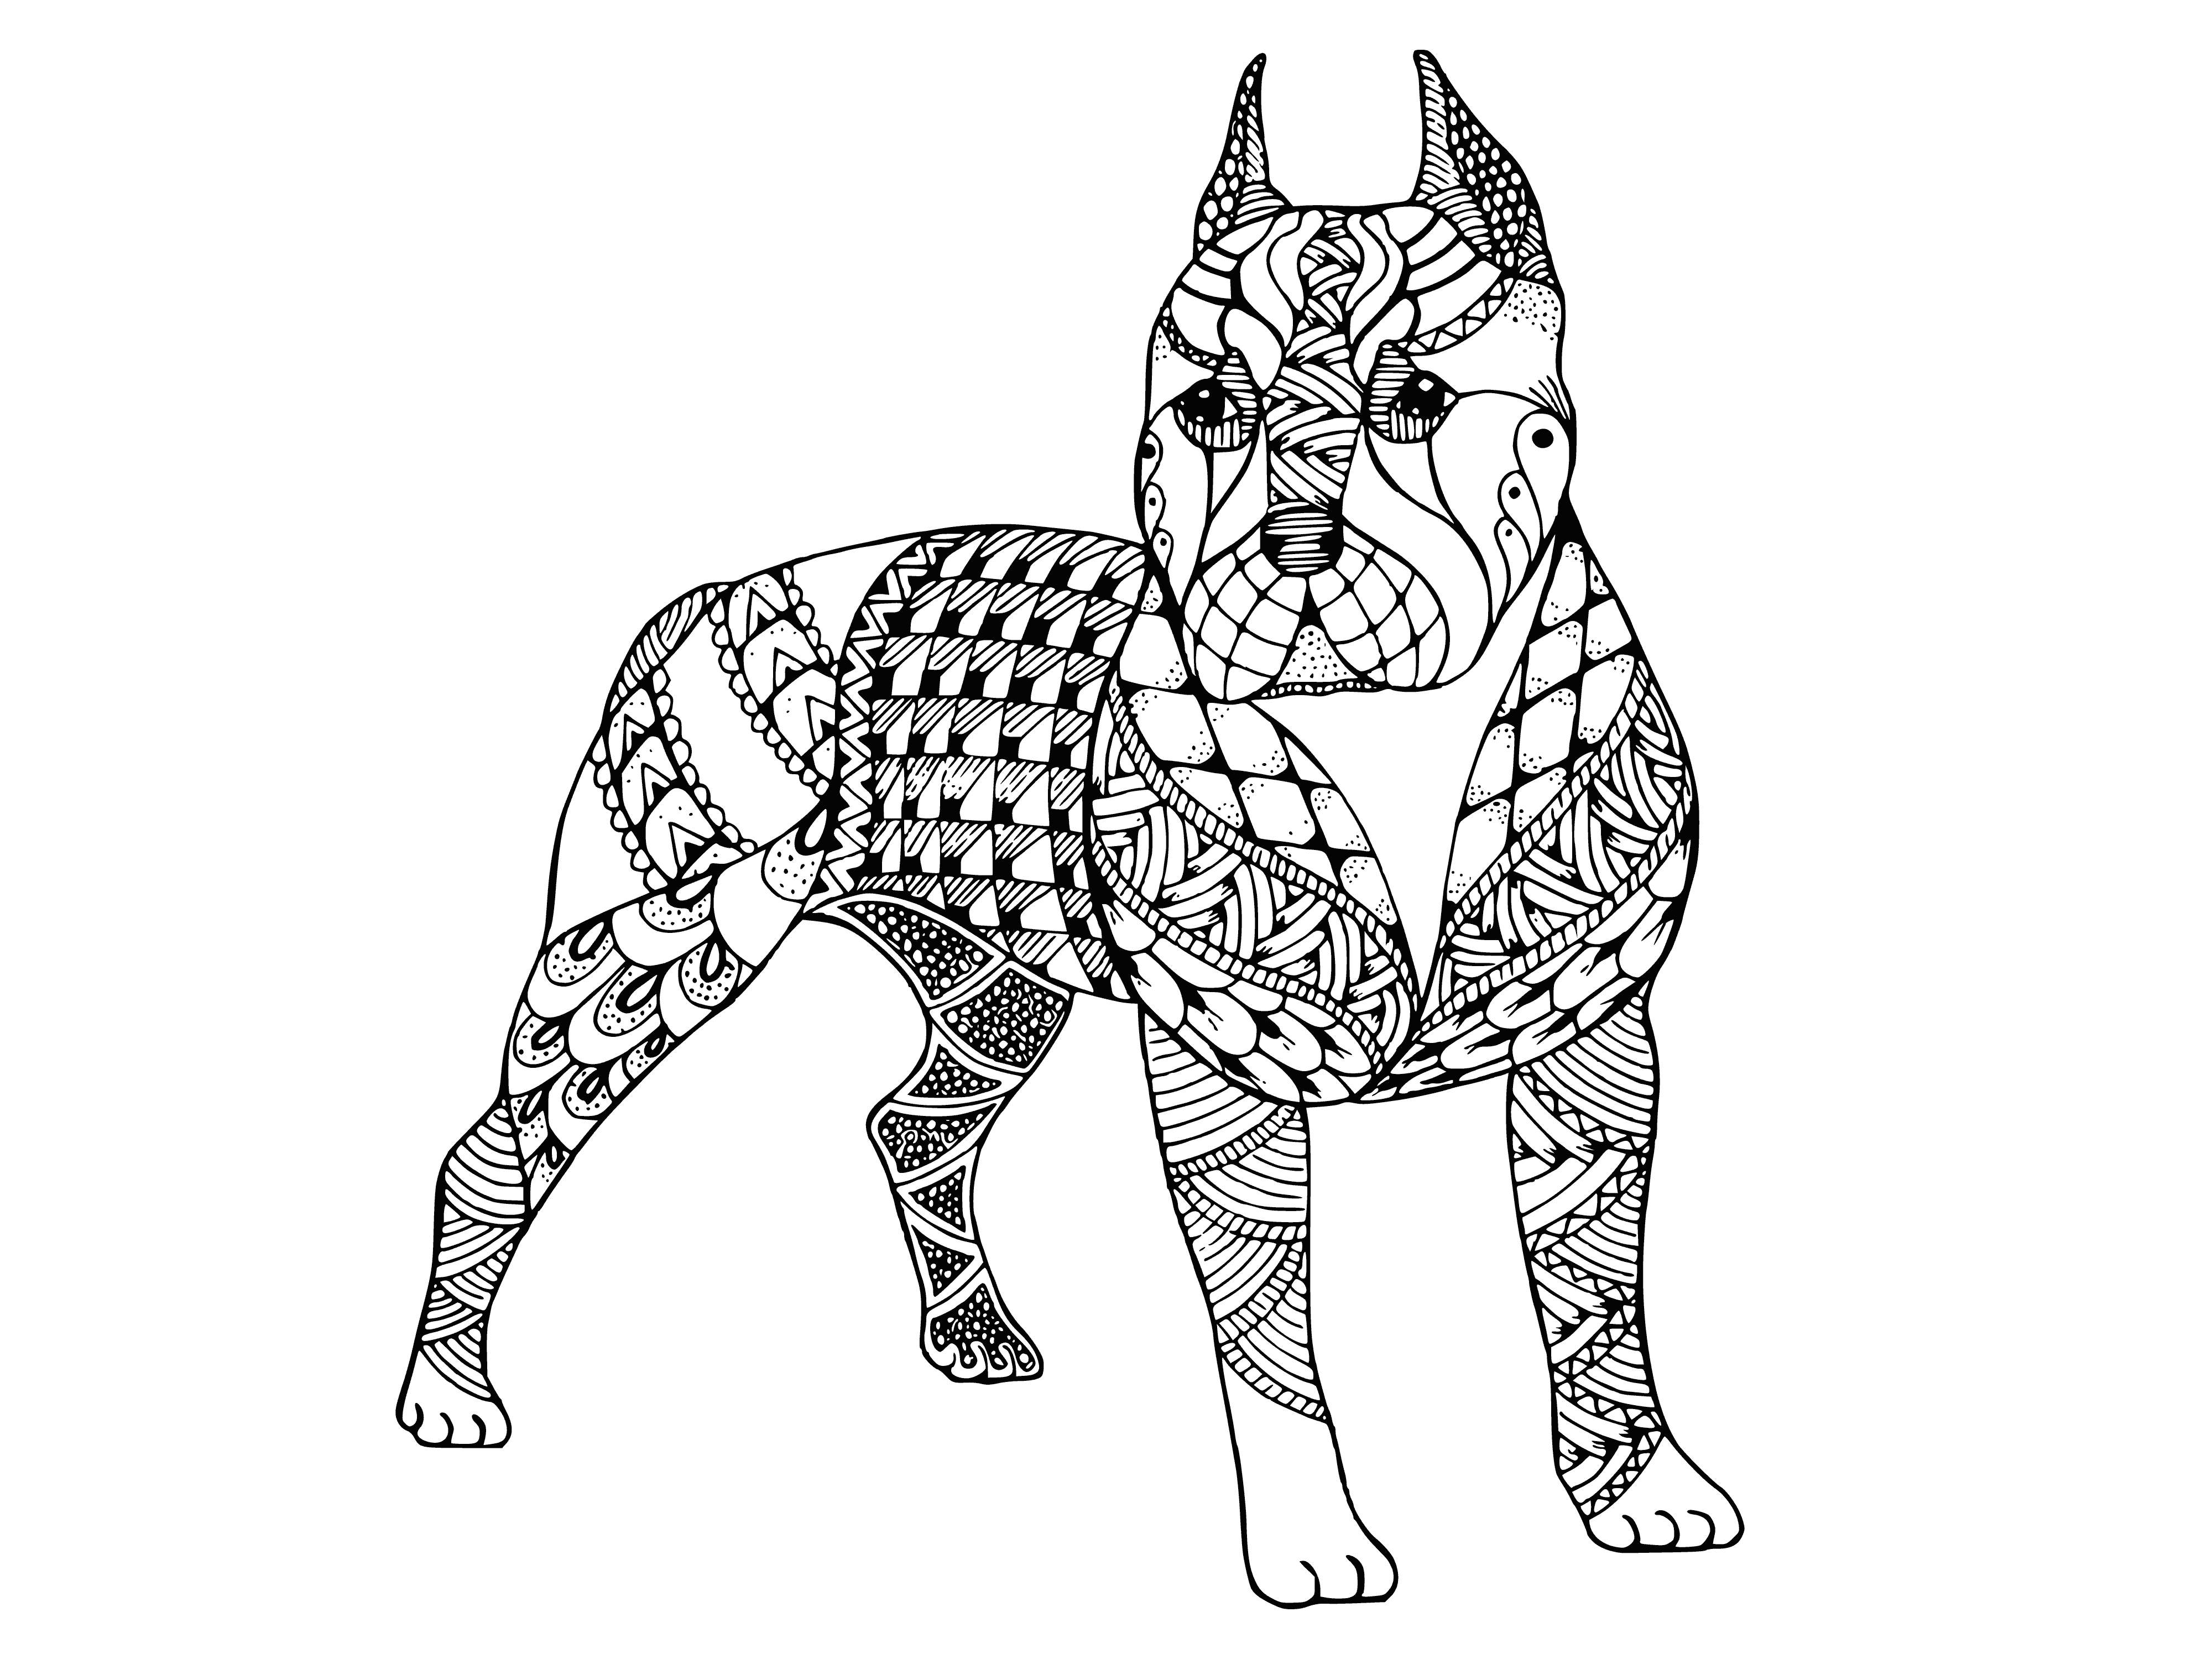 coloring page: Coloring page of Pitbull dog facing viewer with brown/white fur and collar. #coloring #dog #Pitbull